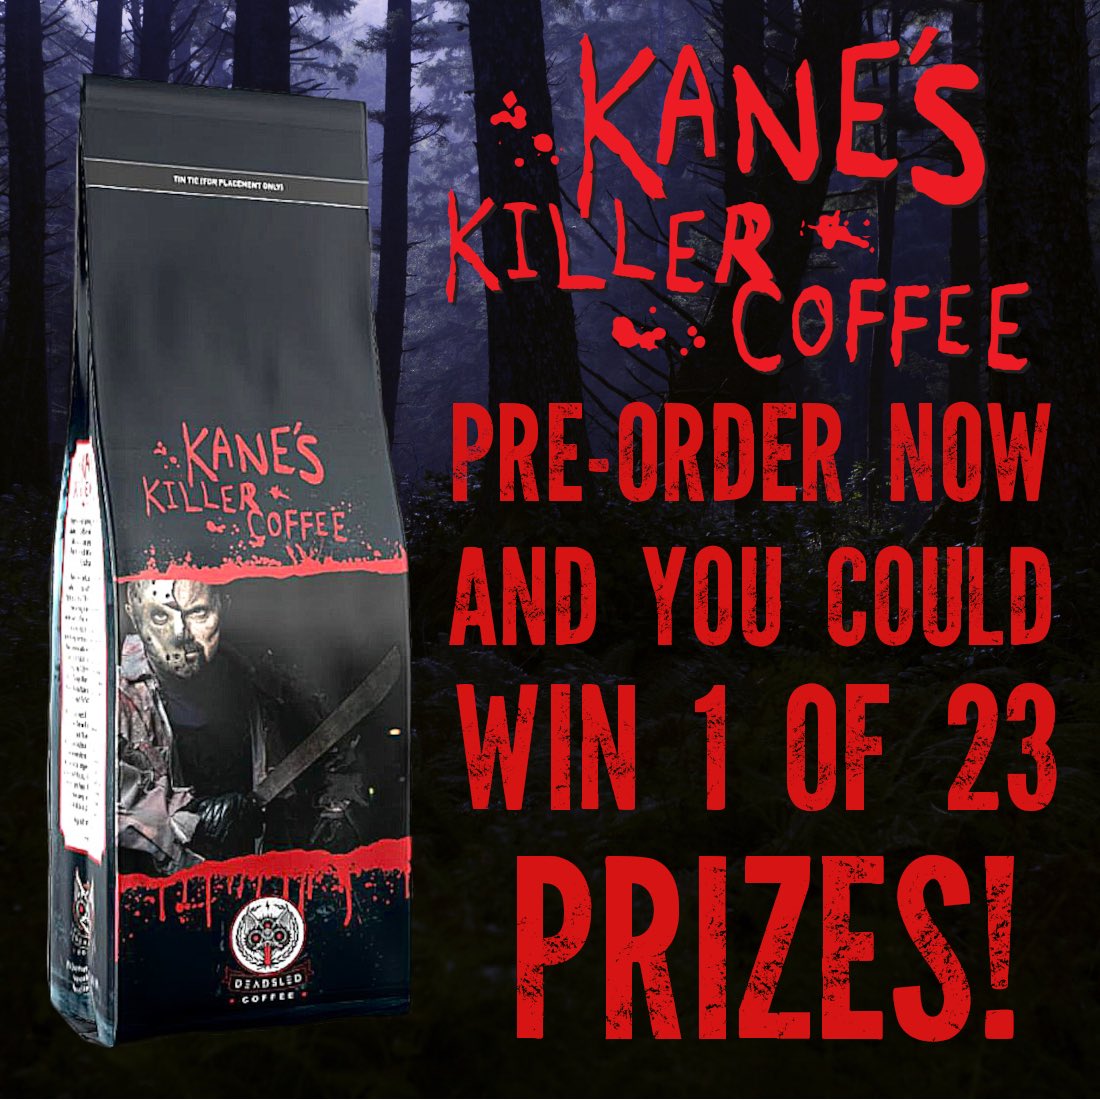 The bags for Kane's Killer Coffee have landed at our roasting facility and the coffee will start roasting next week!! If you order after midnight ET, you will not be eligible to win. @kanehodder1 ☕️🔪 bit.ly/KaneHodder